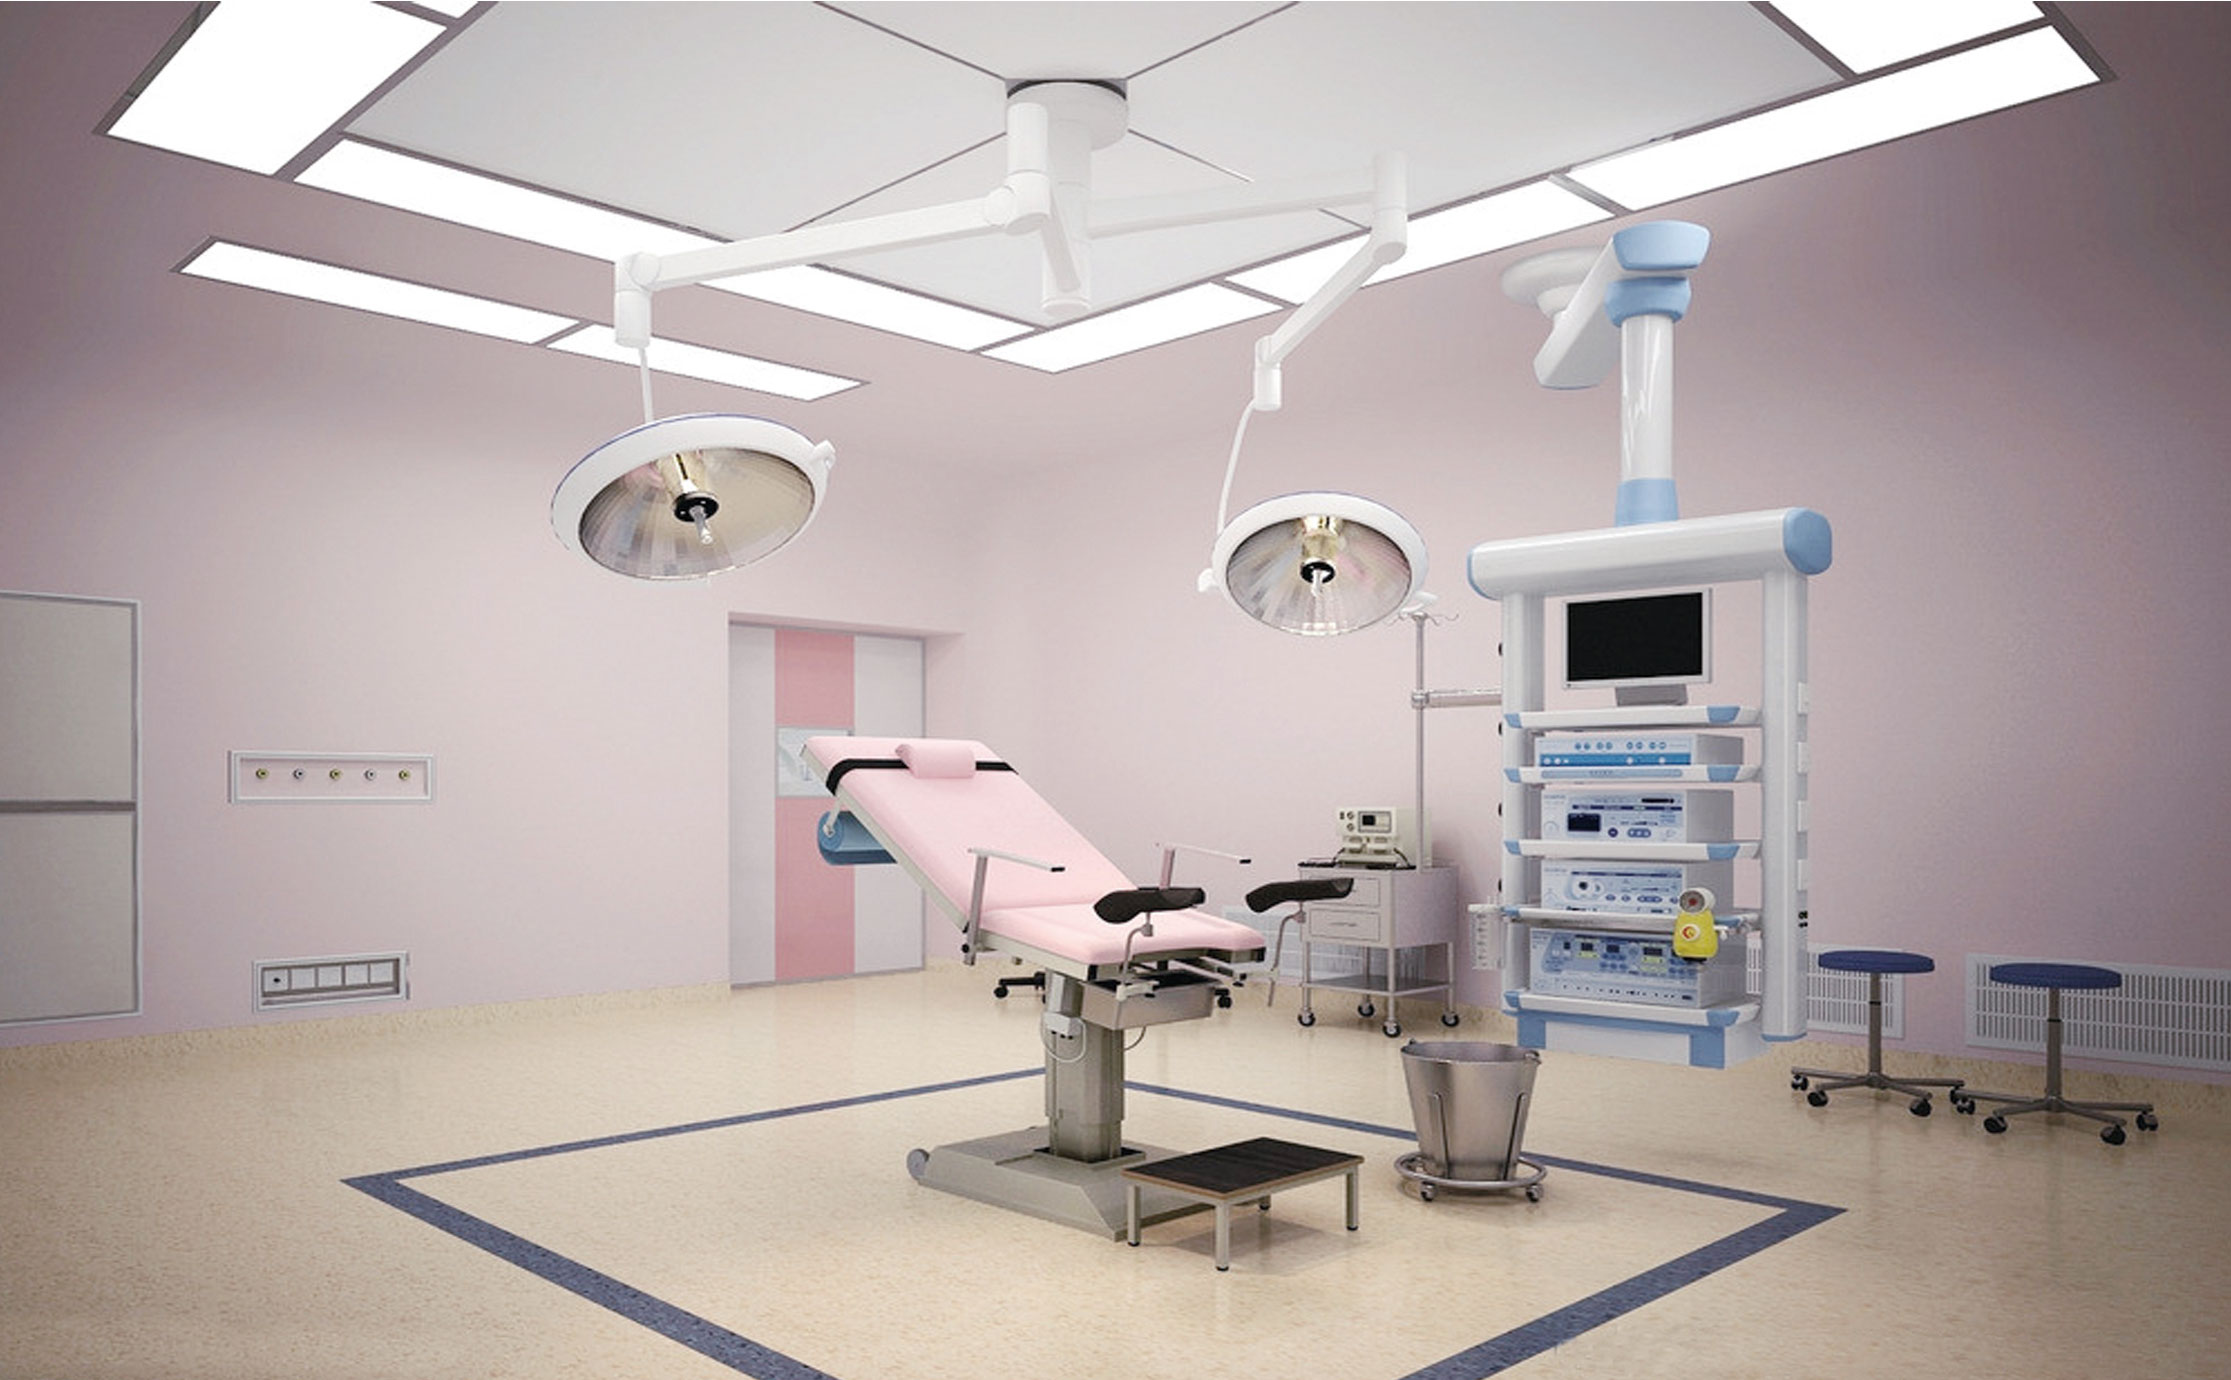 Operating room purification equipment ￨ ed quality assurance ￨ Shijiazhuang operating room purification